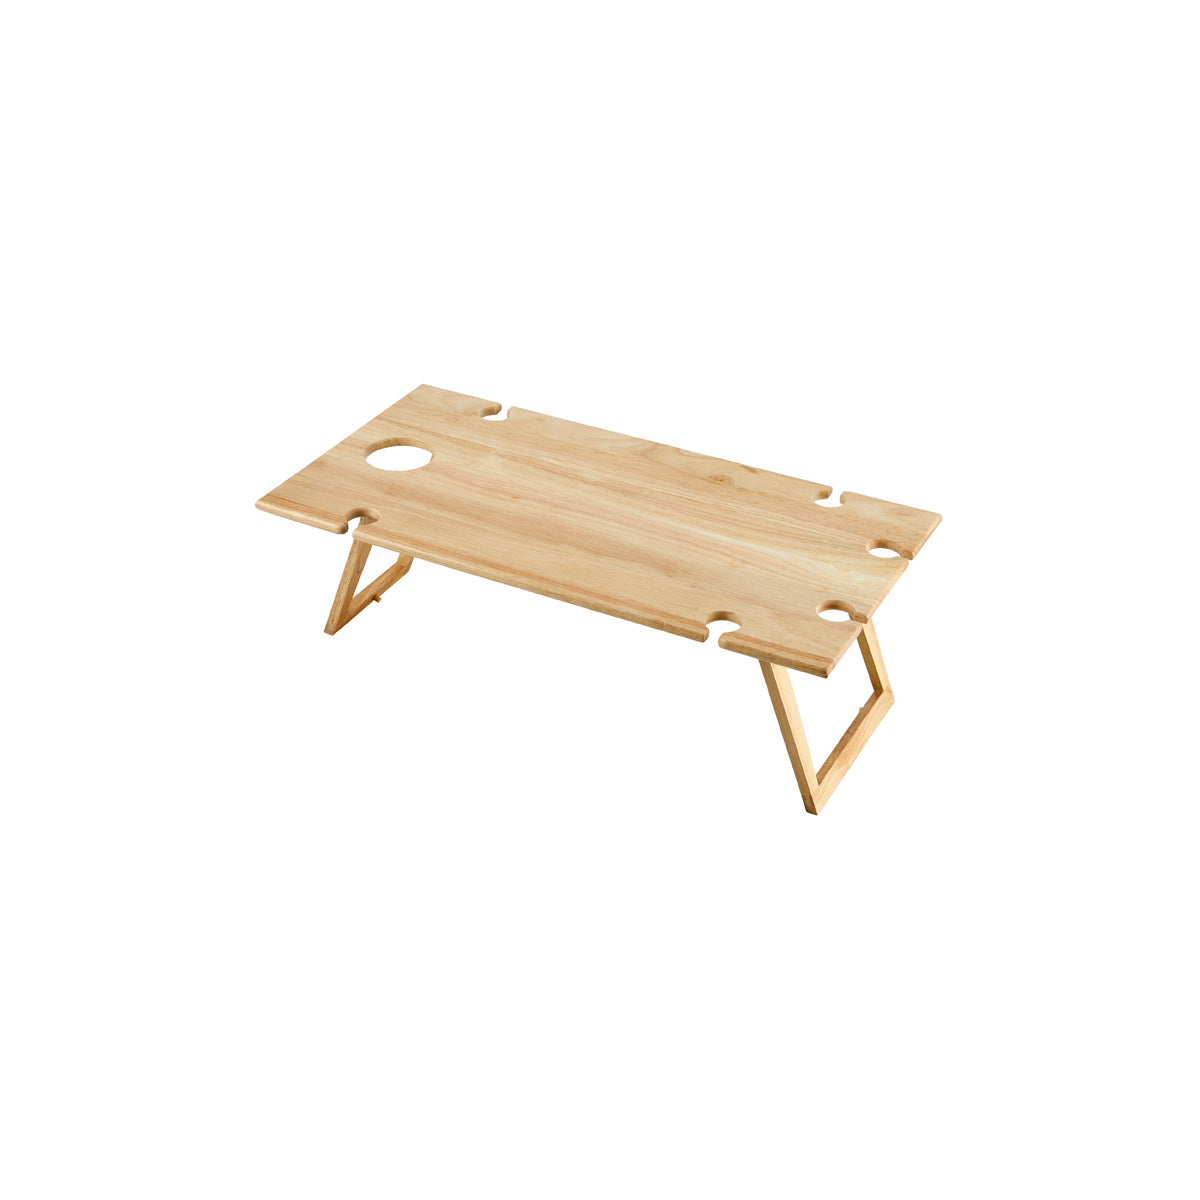 SR50810 Stanley Rogers Travel Picnic Table Large 750x380mm Tomkin Australia Hospitality Supplies